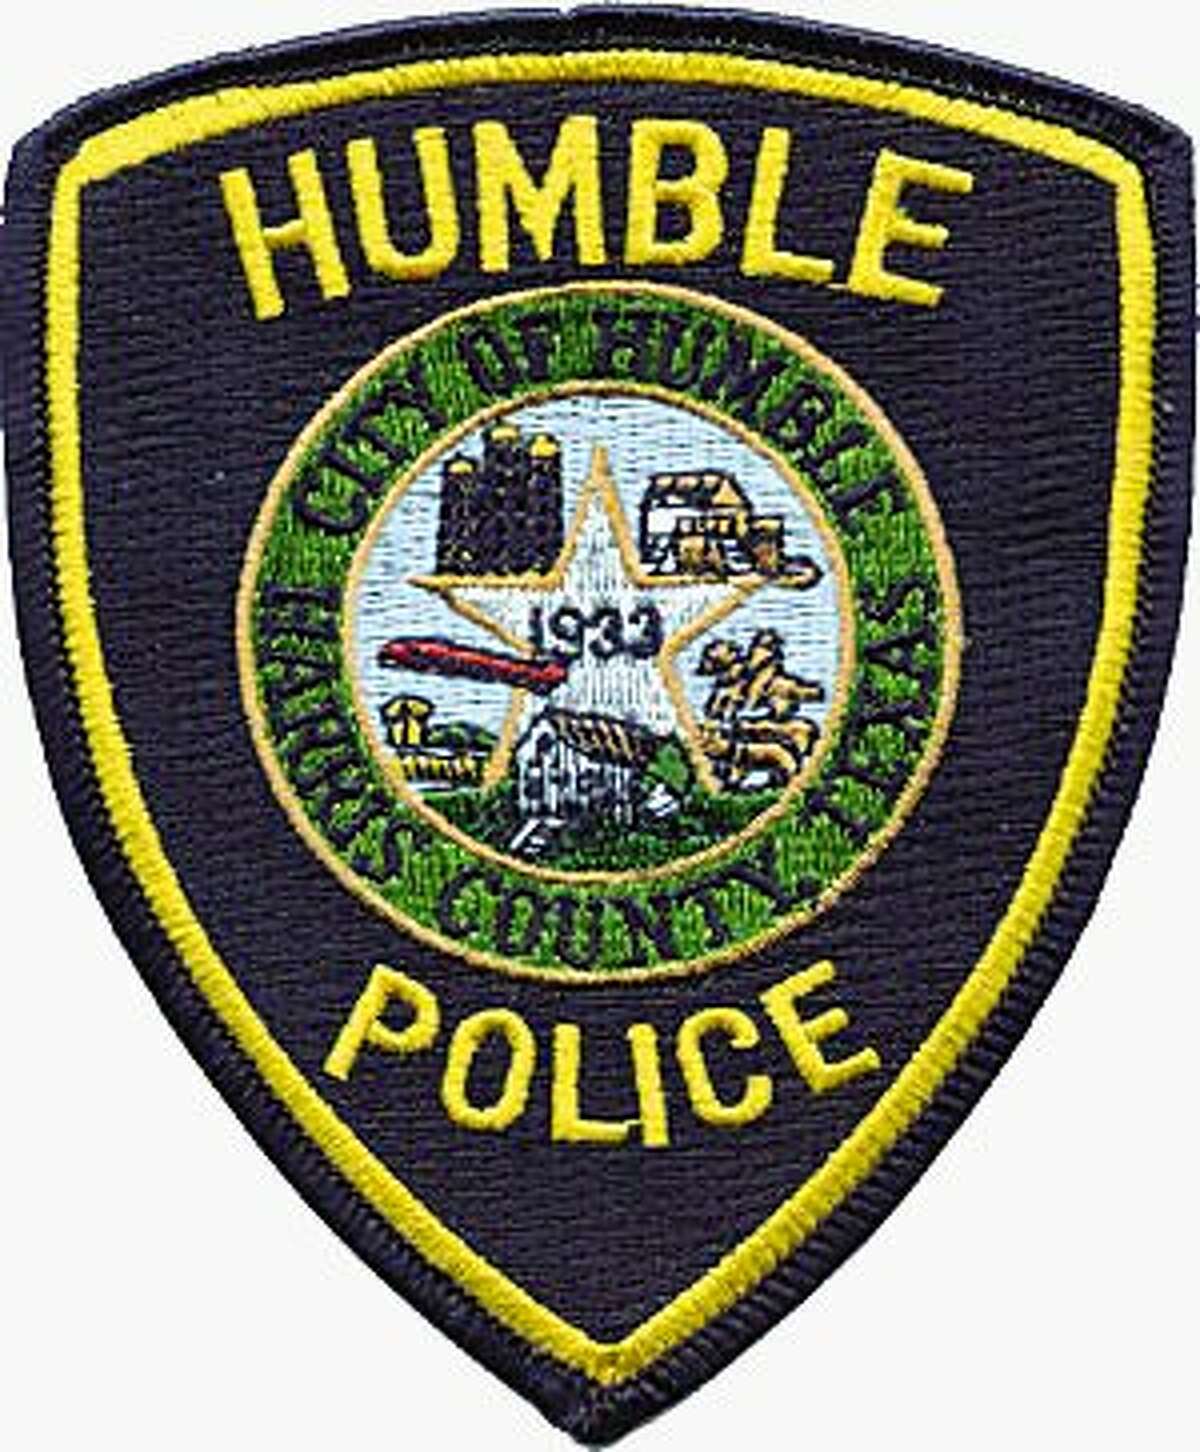 The Humble Police Department is - Humble Police Department